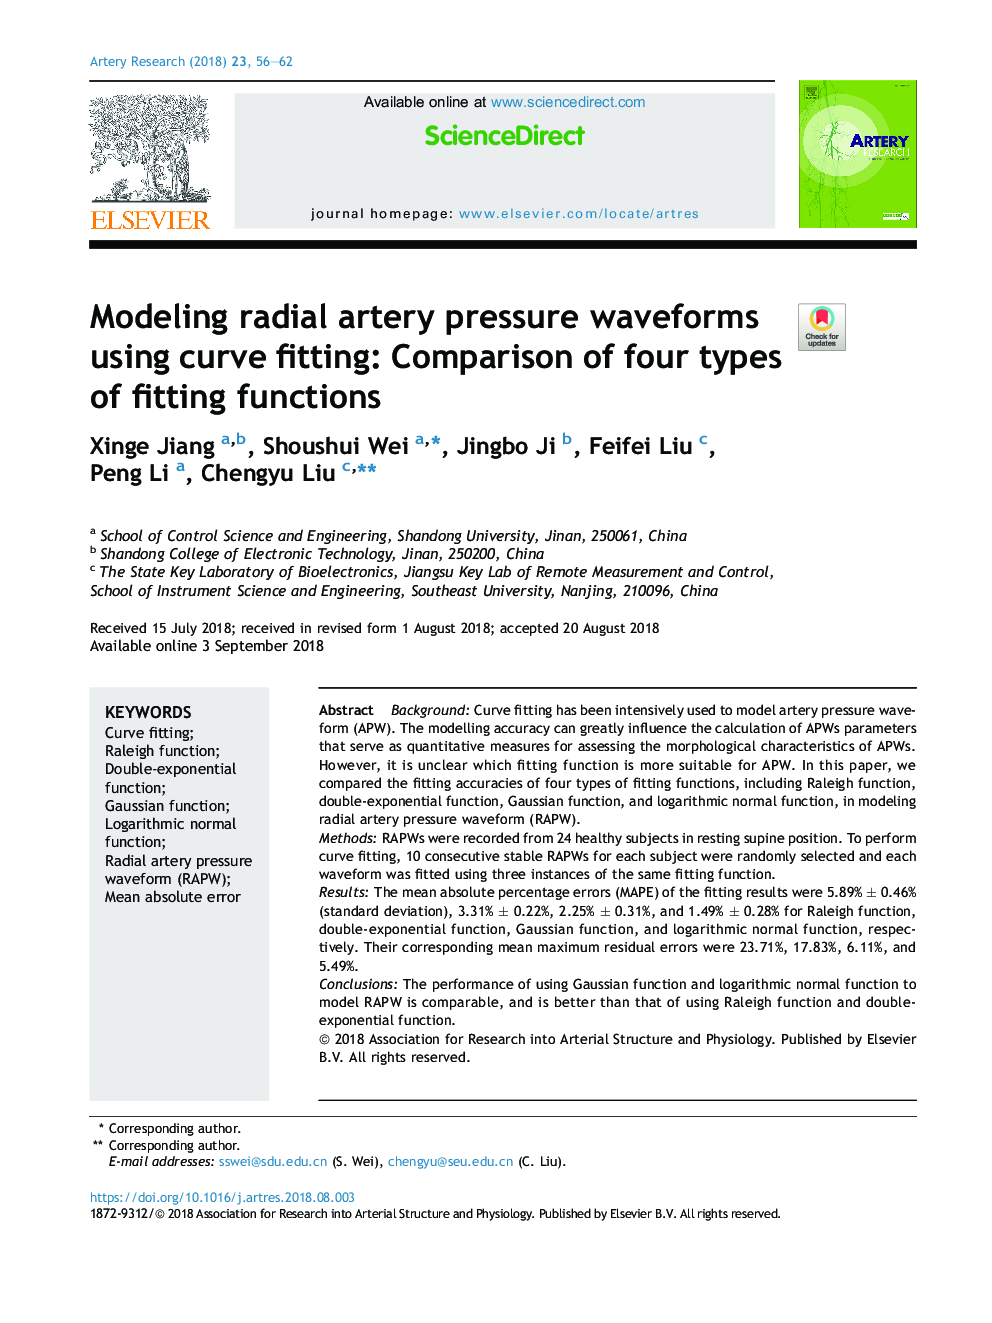 Modeling radial artery pressure waveforms using curve fitting: Comparison of four types of fitting functions